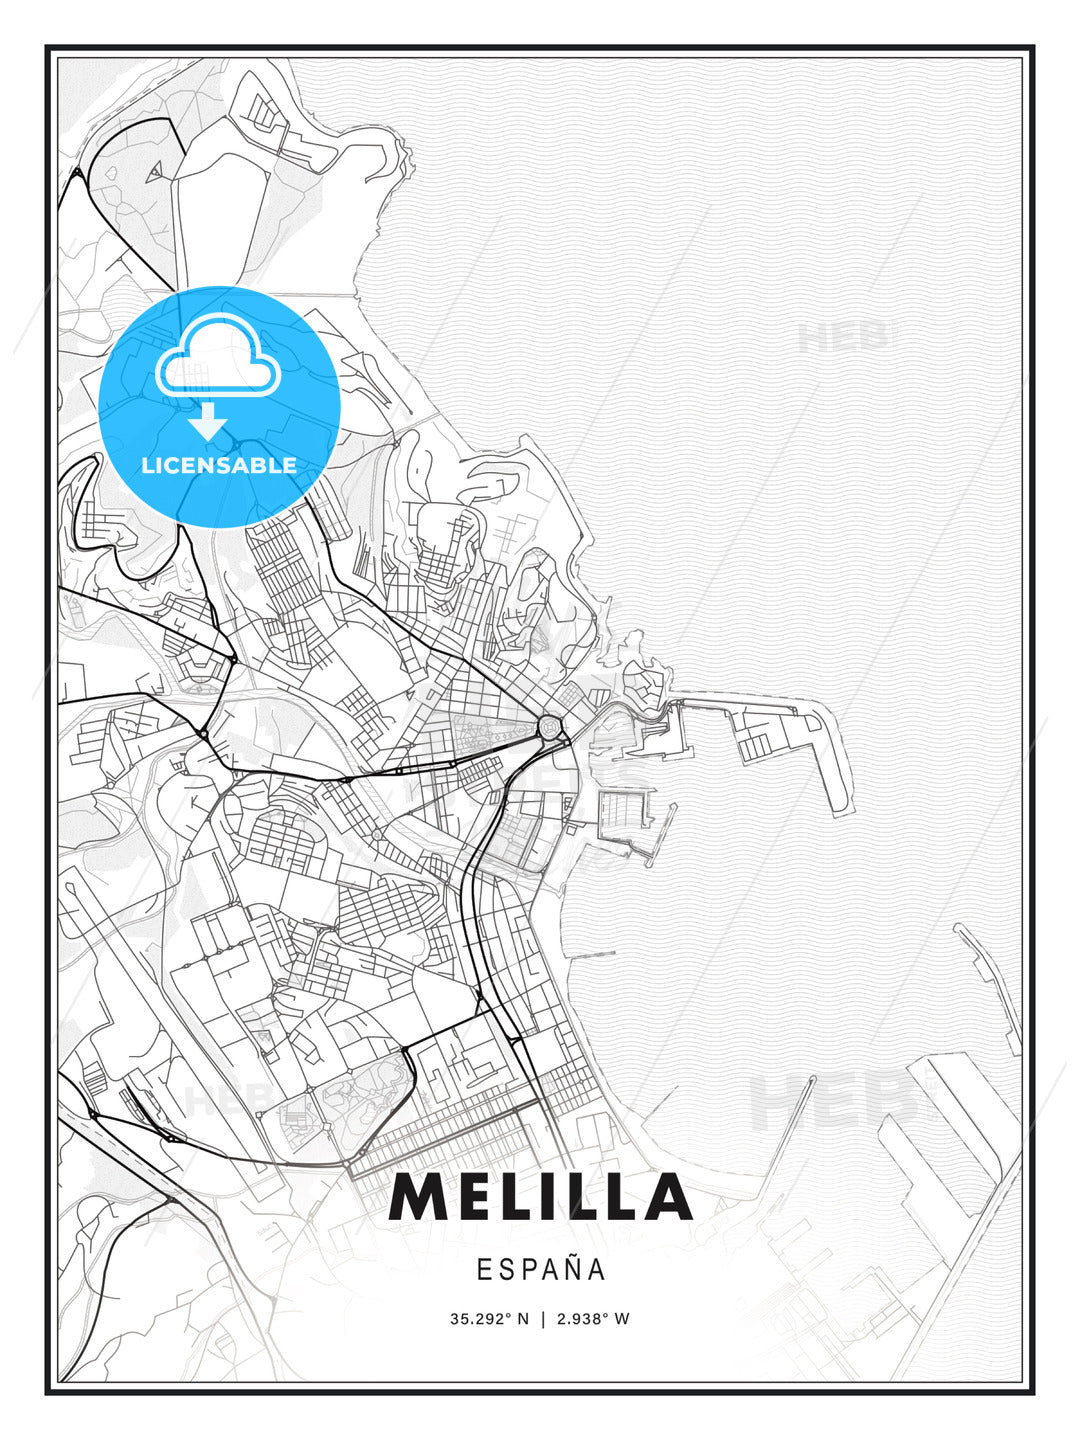 Melilla, Spain, Modern Print Template in Various Formats - HEBSTREITS Sketches